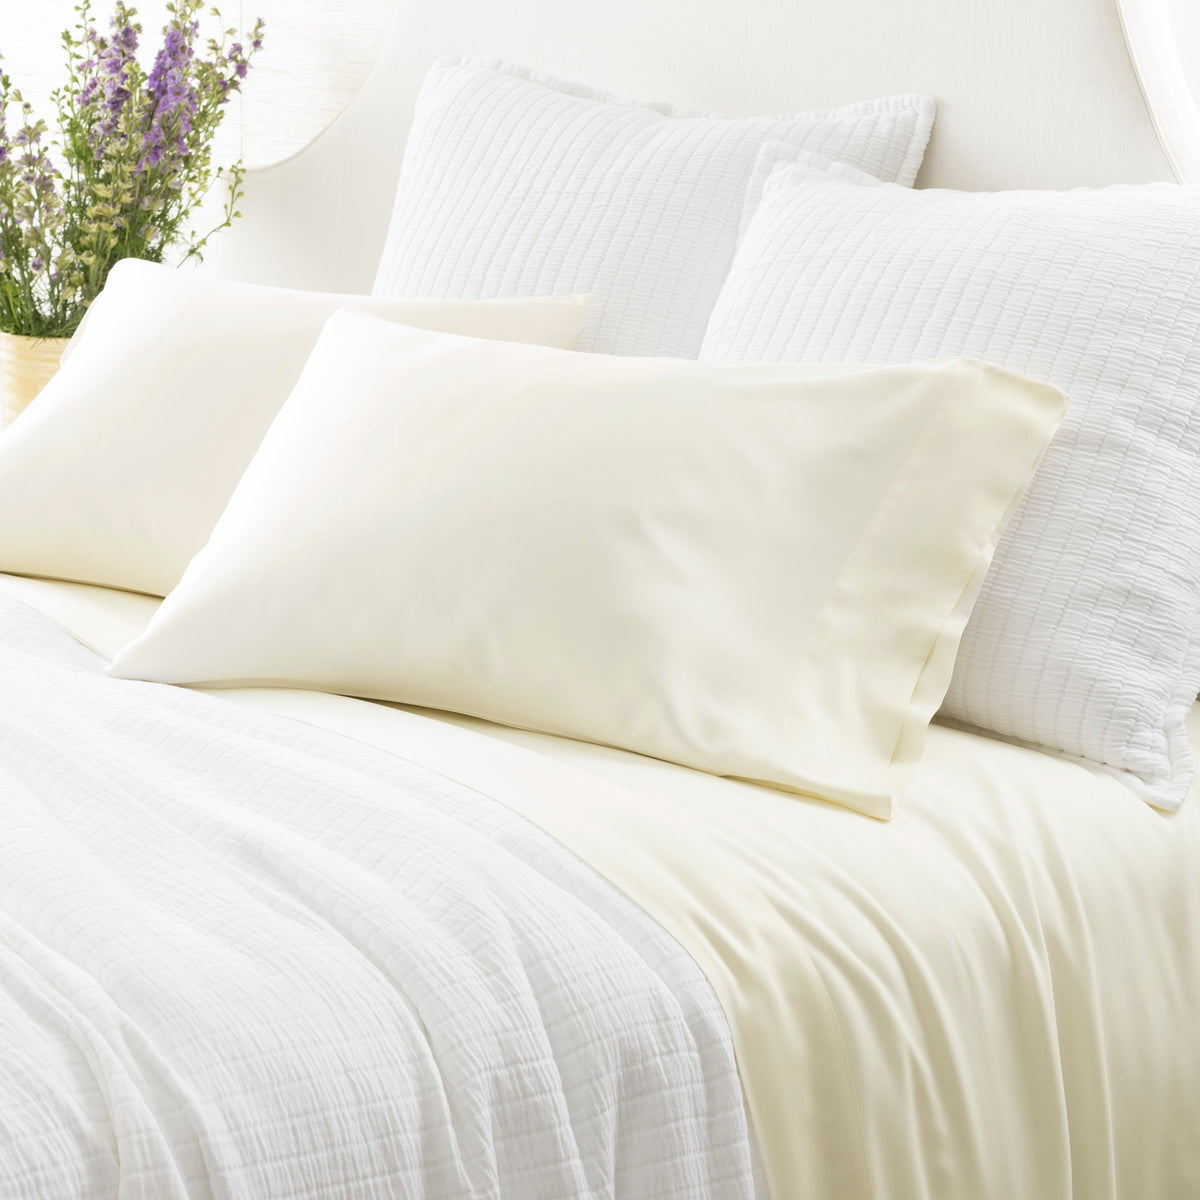 Pillowcase of Pine Cone Hill Silken Solid Bedding in Color Ivory